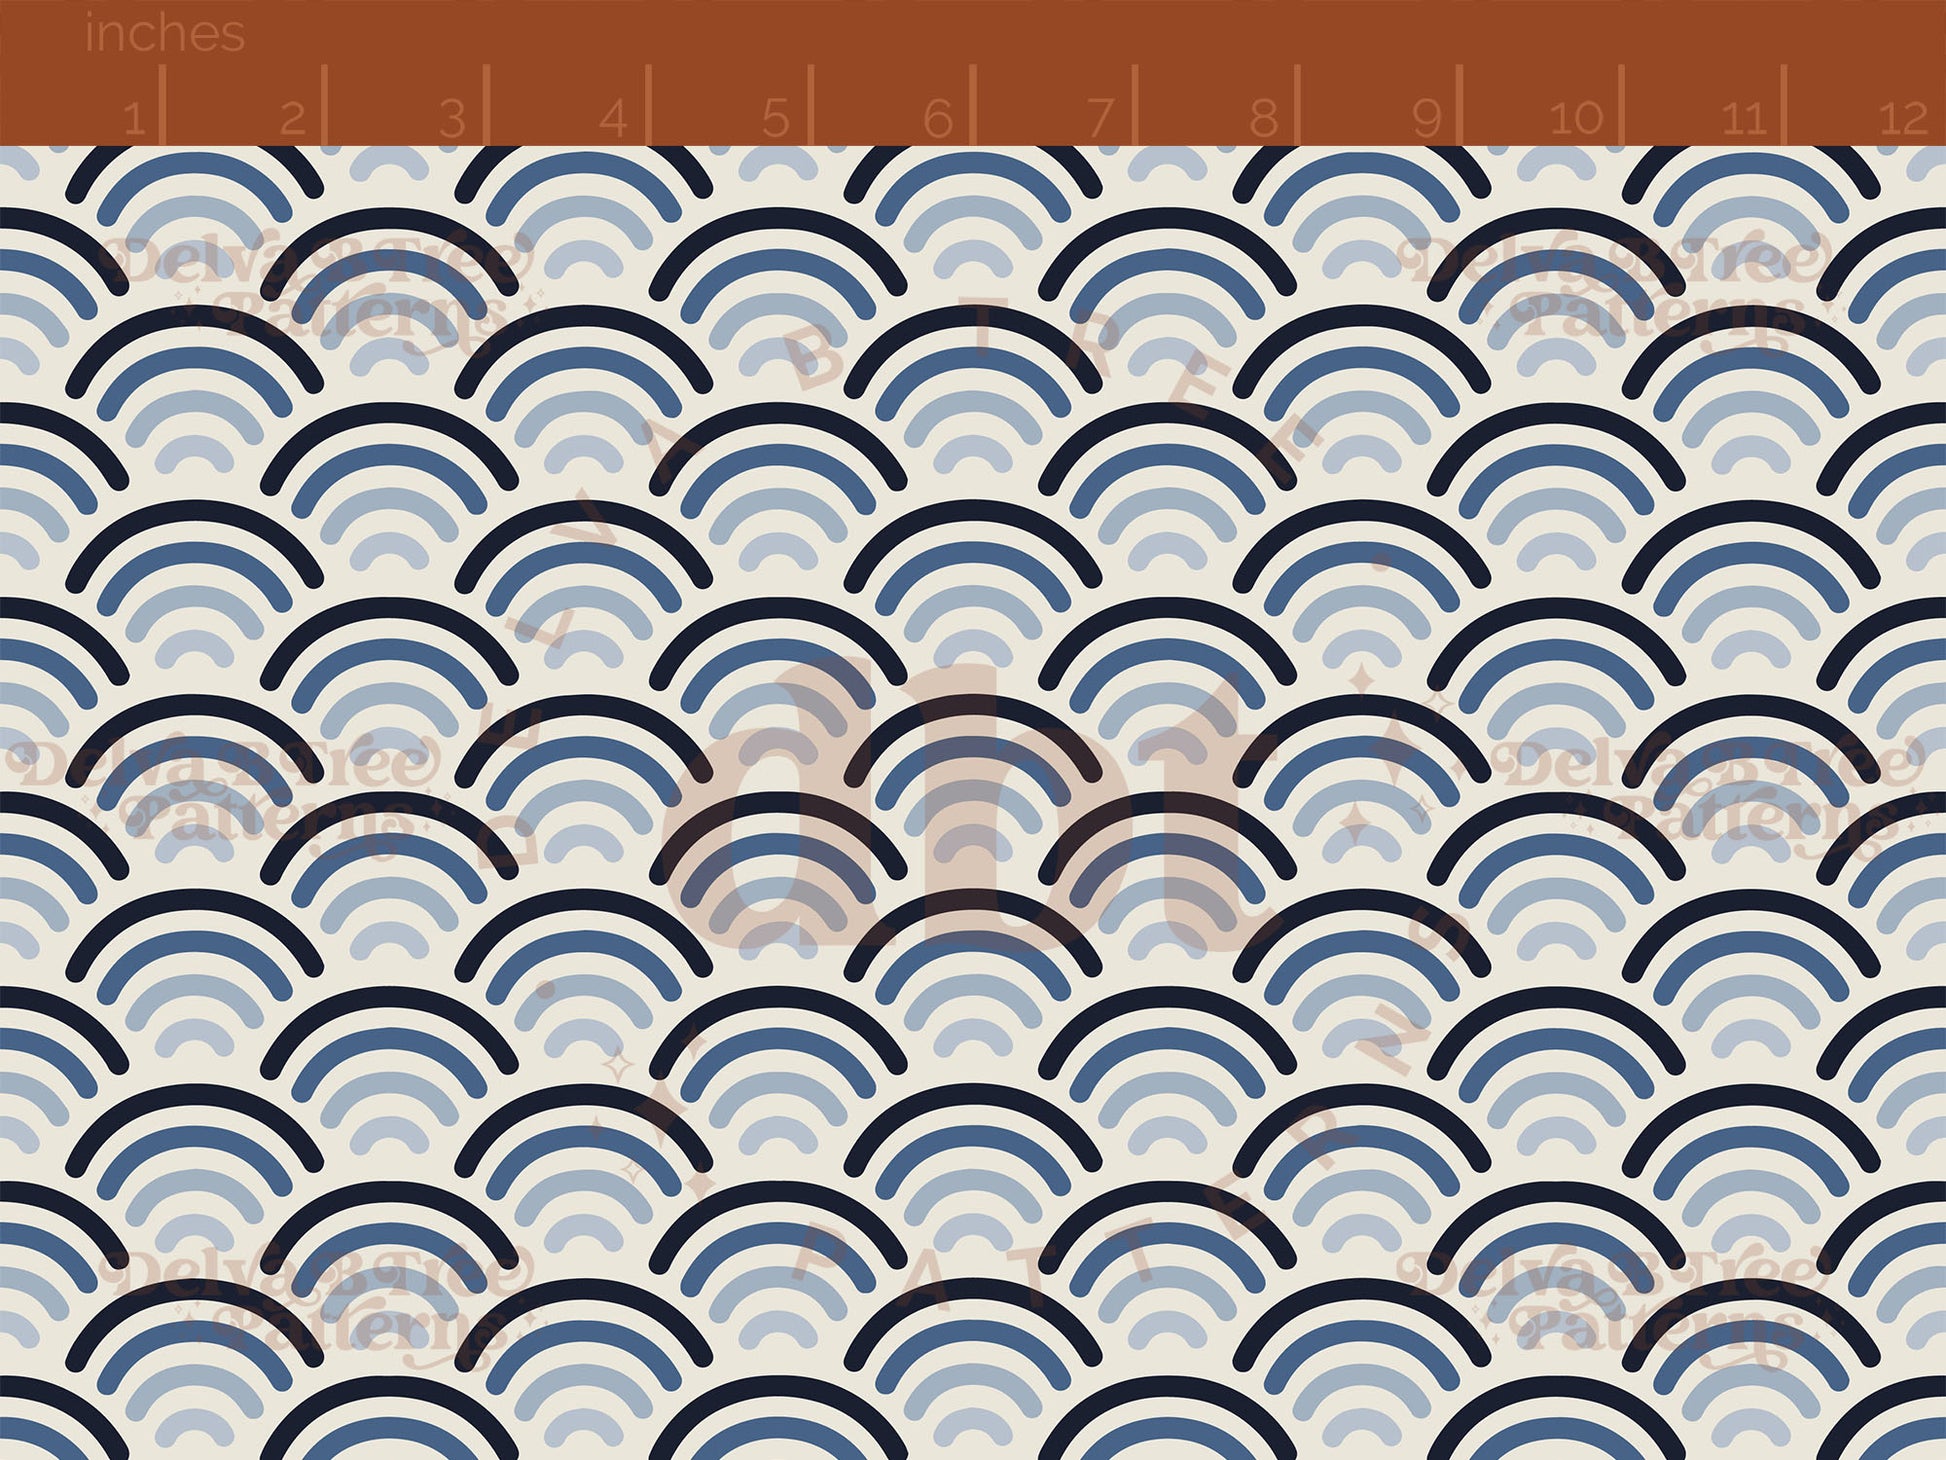 Small blue patriotic summer rainbows on an alabaster / vintage off white background seamless pattern scale digital file for small shops that make handmade products in small batches.